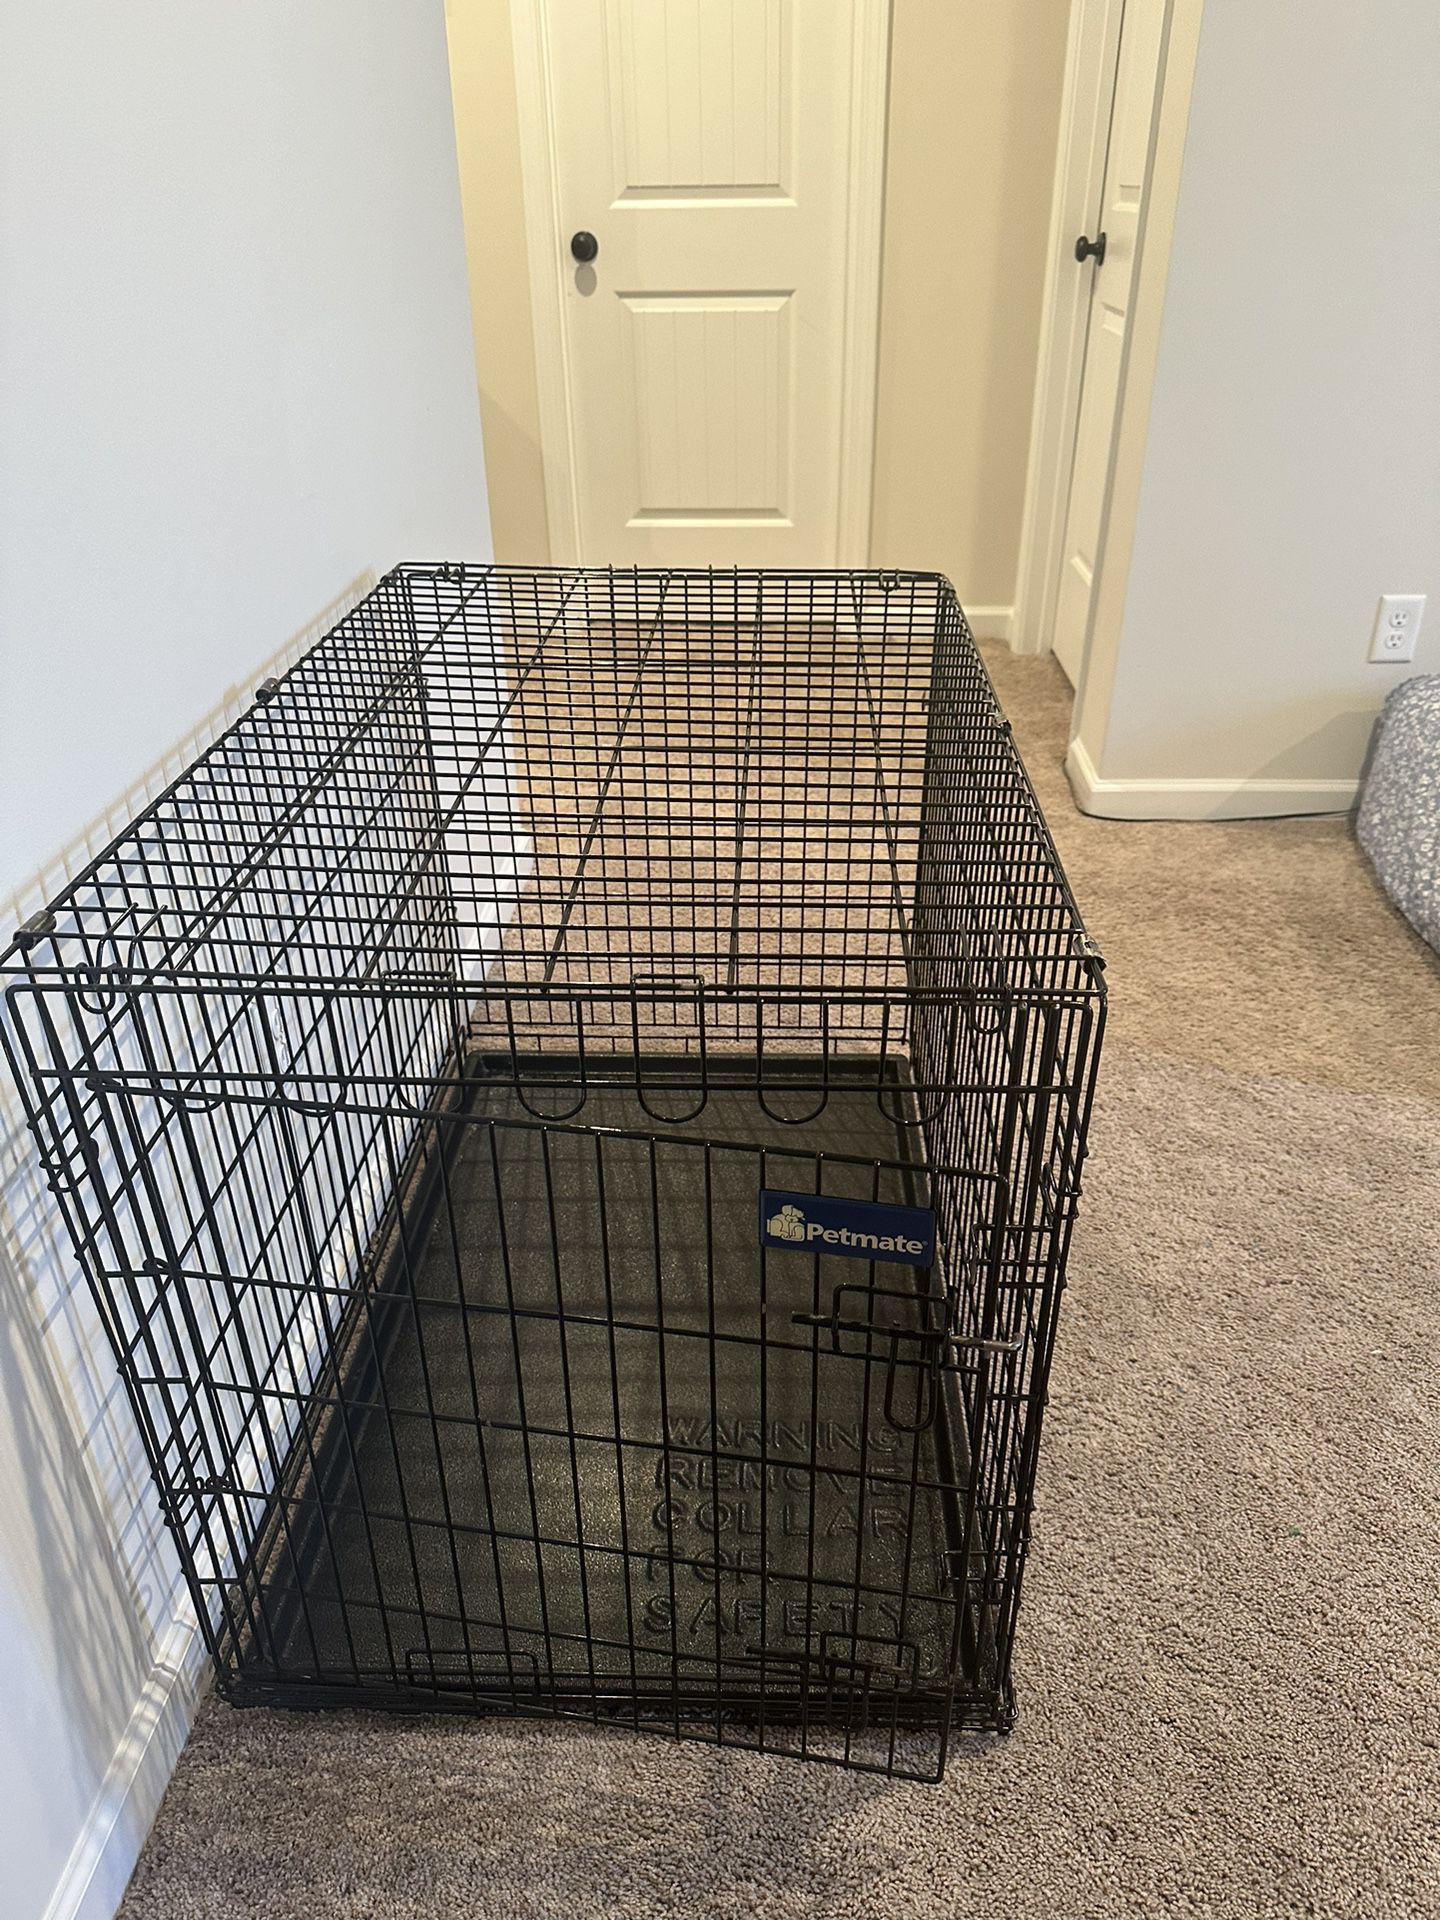 X large dog crate 